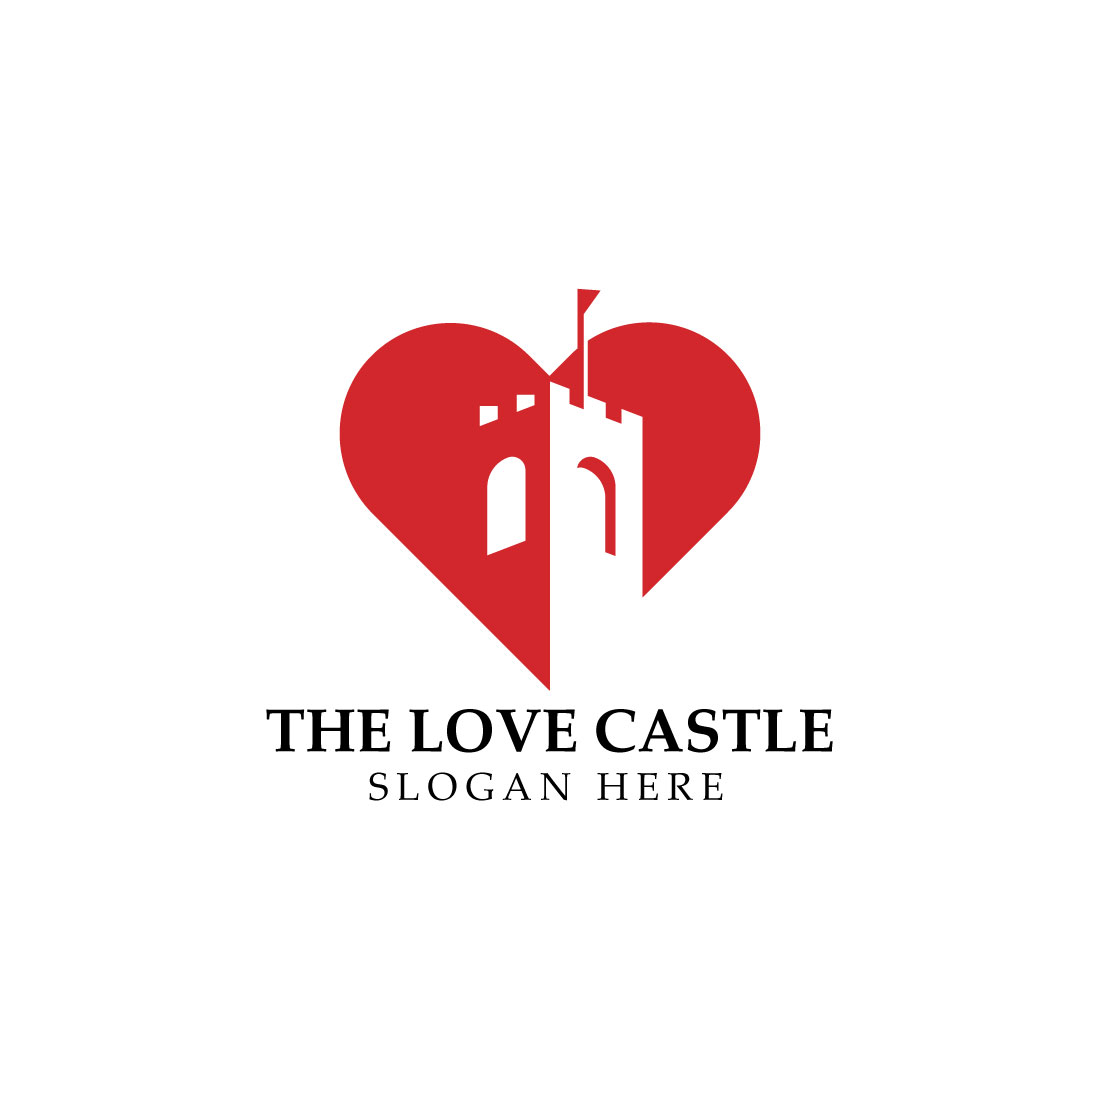 Love and castle negative space logo design preview image.